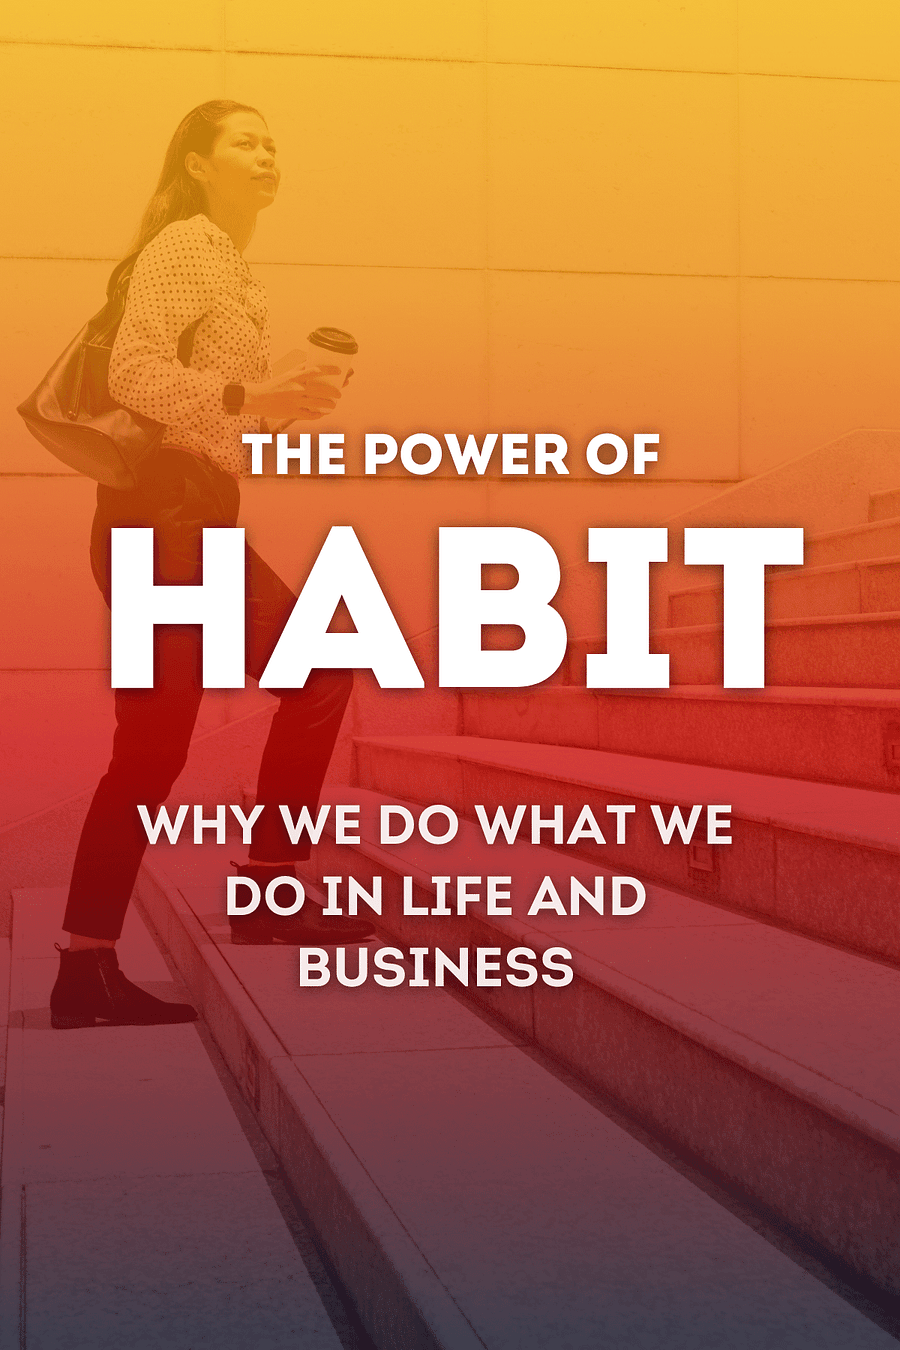 The Power of Habit by Charles Duhigg - Book Summary